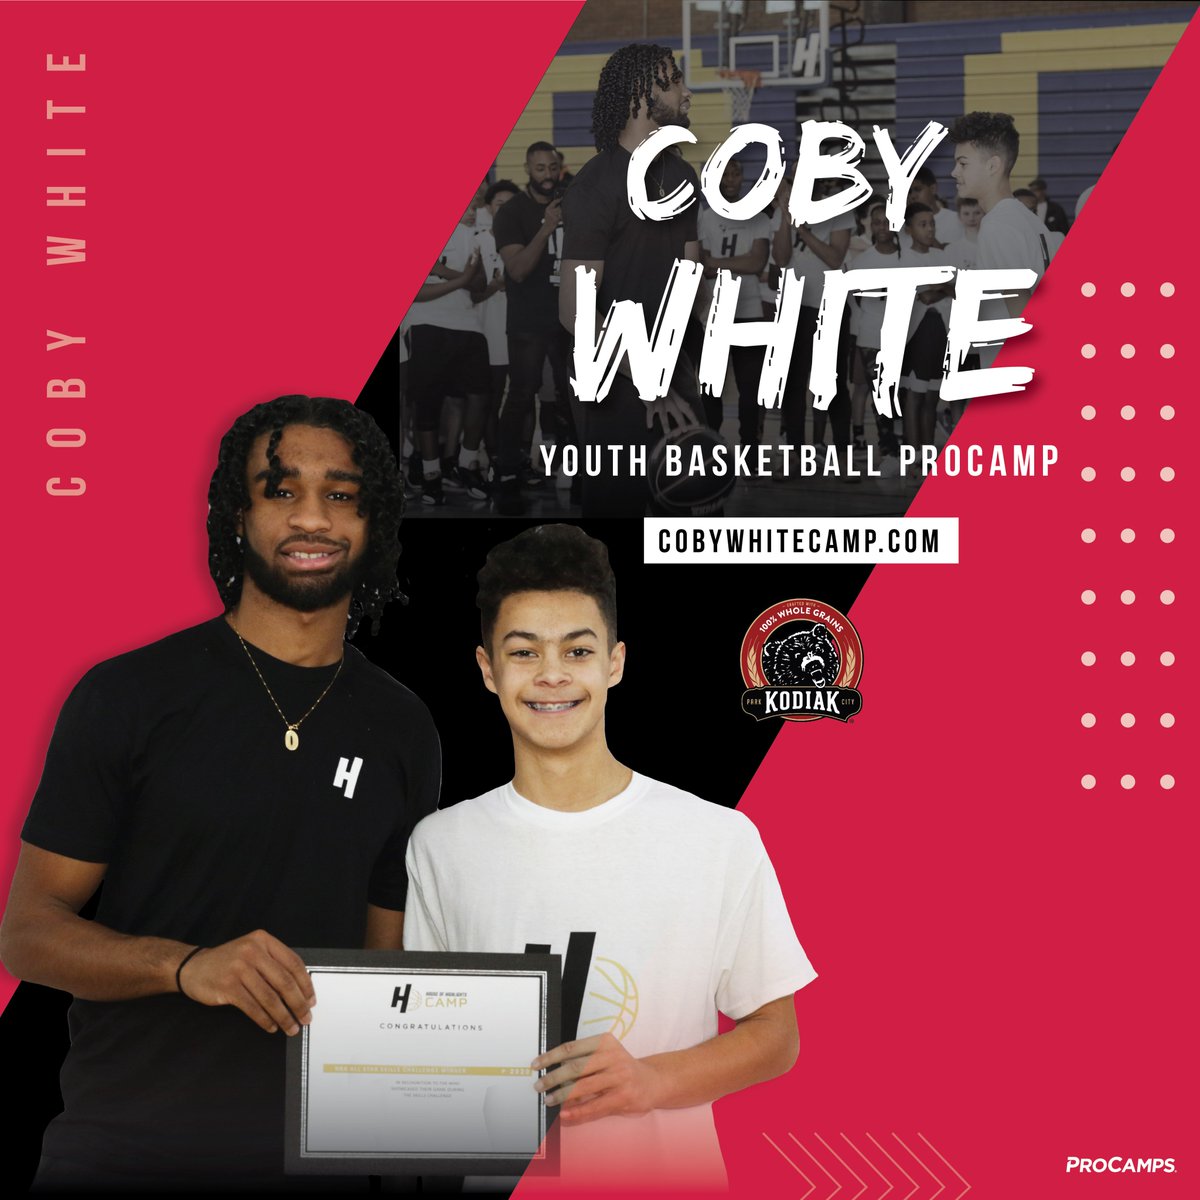 Big Time Player – Big Time Camp! 🏆 After dropping 42 in the Play-In Tournament earlier this week, Coby White has announced his Basketball Camp in Chicago 🏀 Visit CobyWhiteCamp.com to register 🎟️